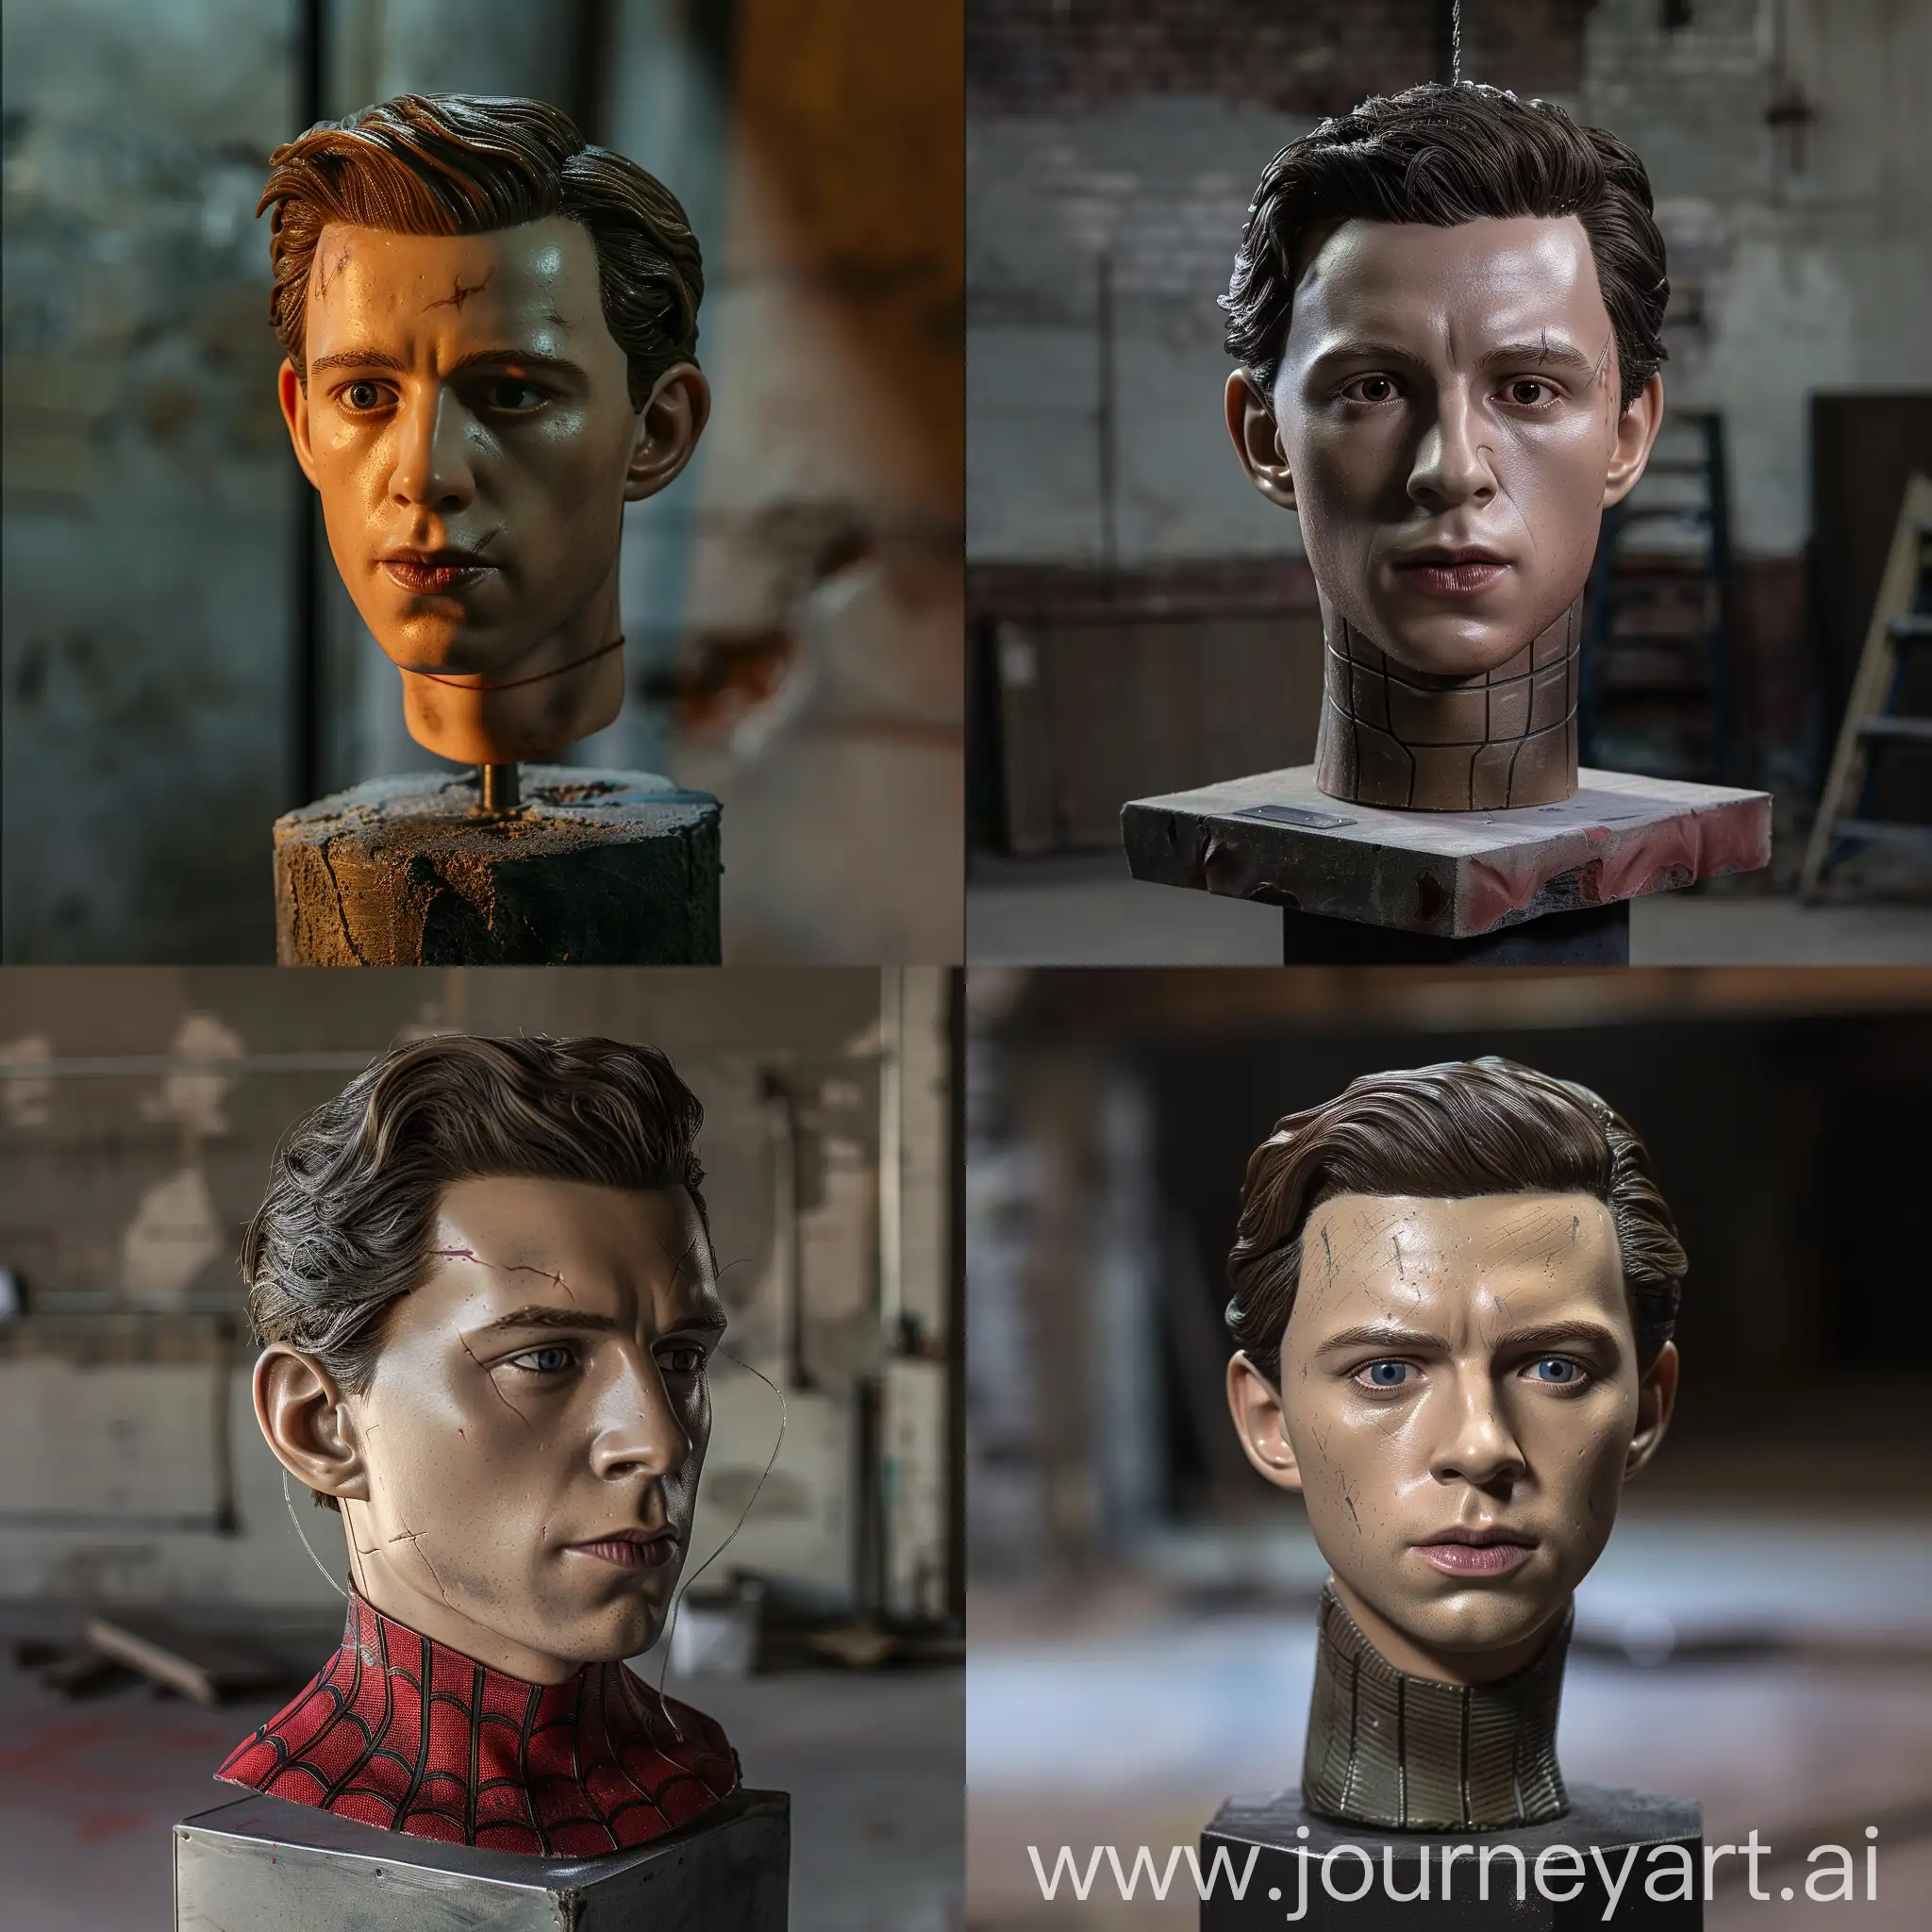 Realistic-Tom-Holland-Prototype-Head-on-Display-in-Dimly-Lit-Basement